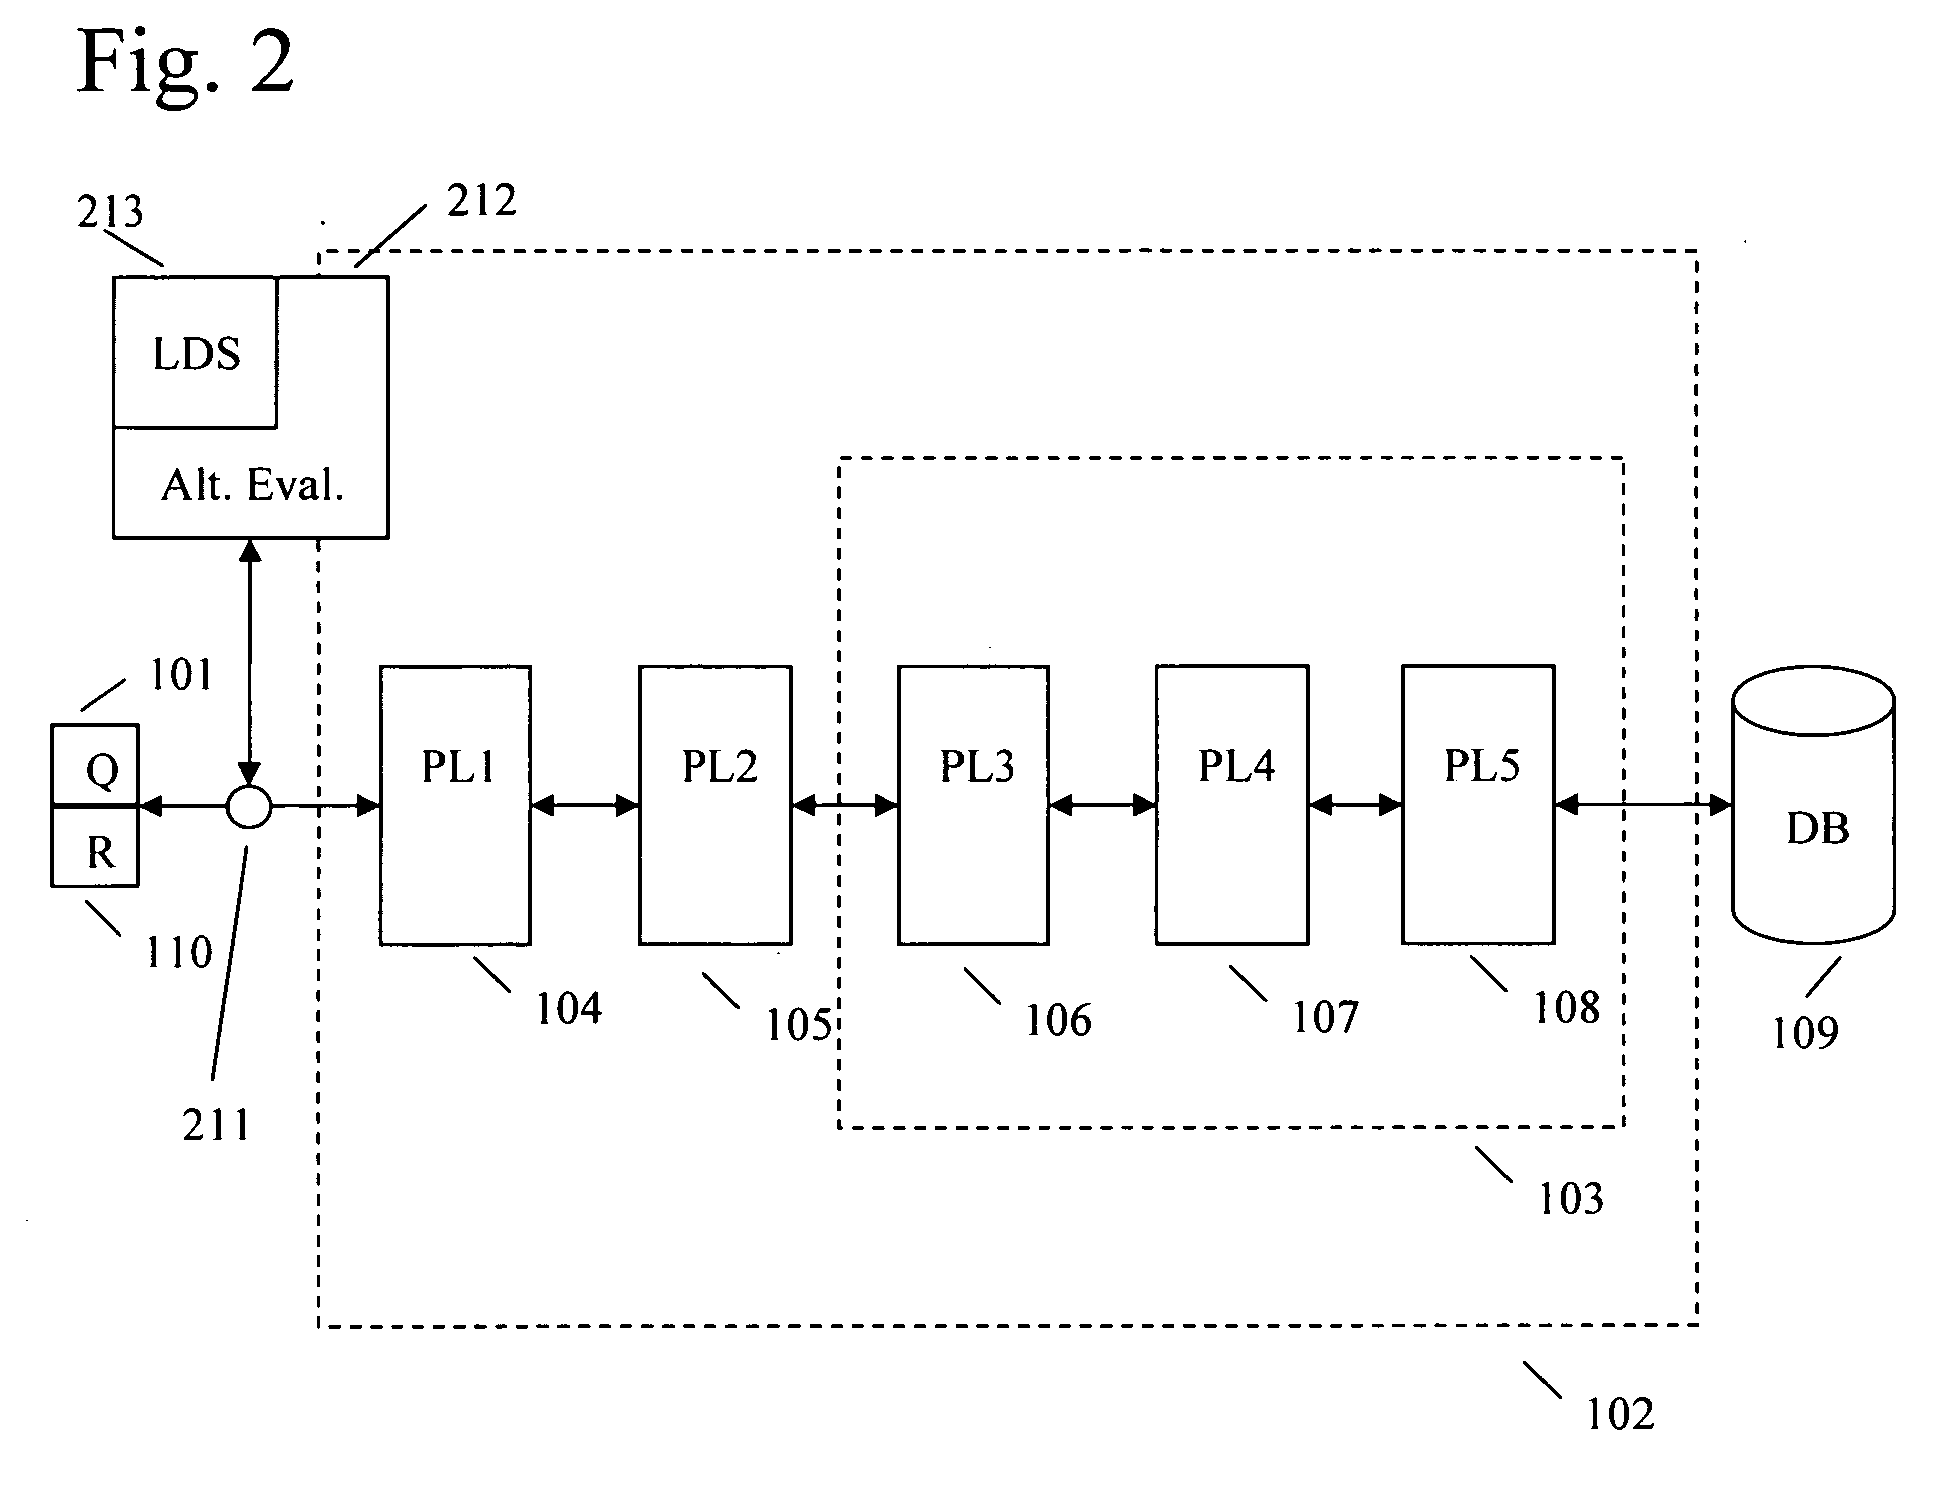 Method and apparatus for enhancing directory performance